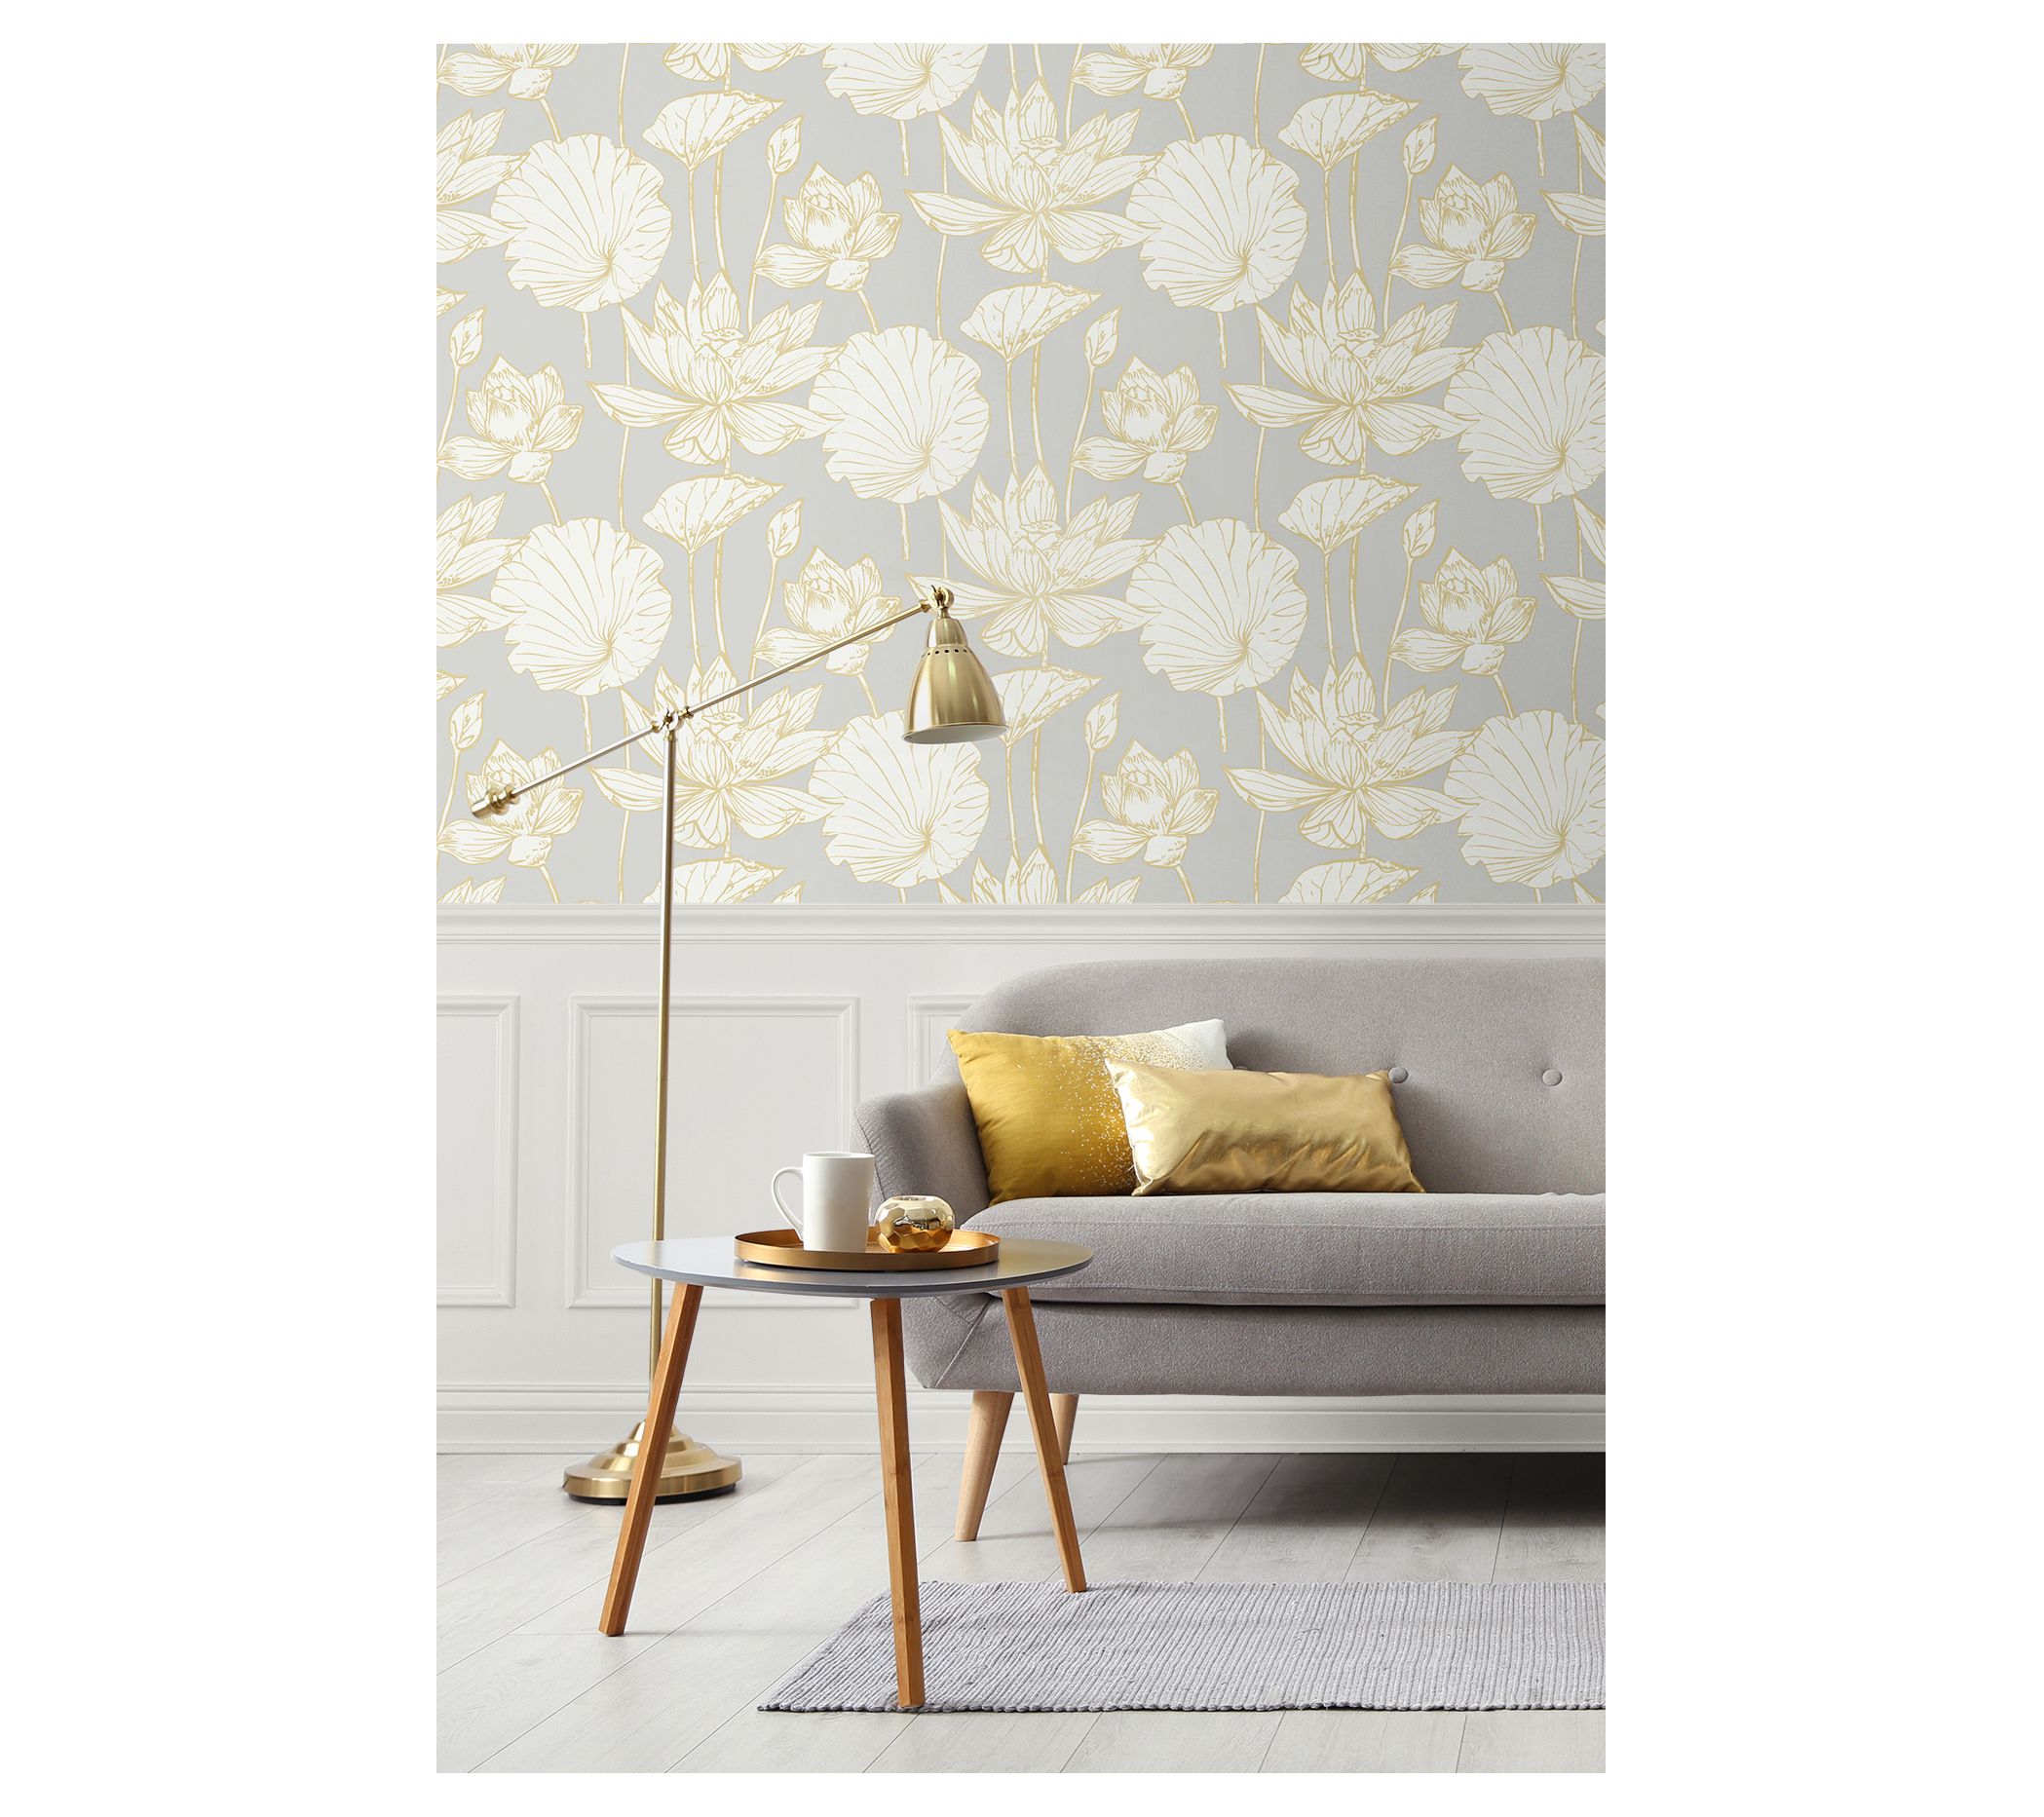 Seabrook Designs Water Lily Floral Unpasted Wal lpaper - QVC.com